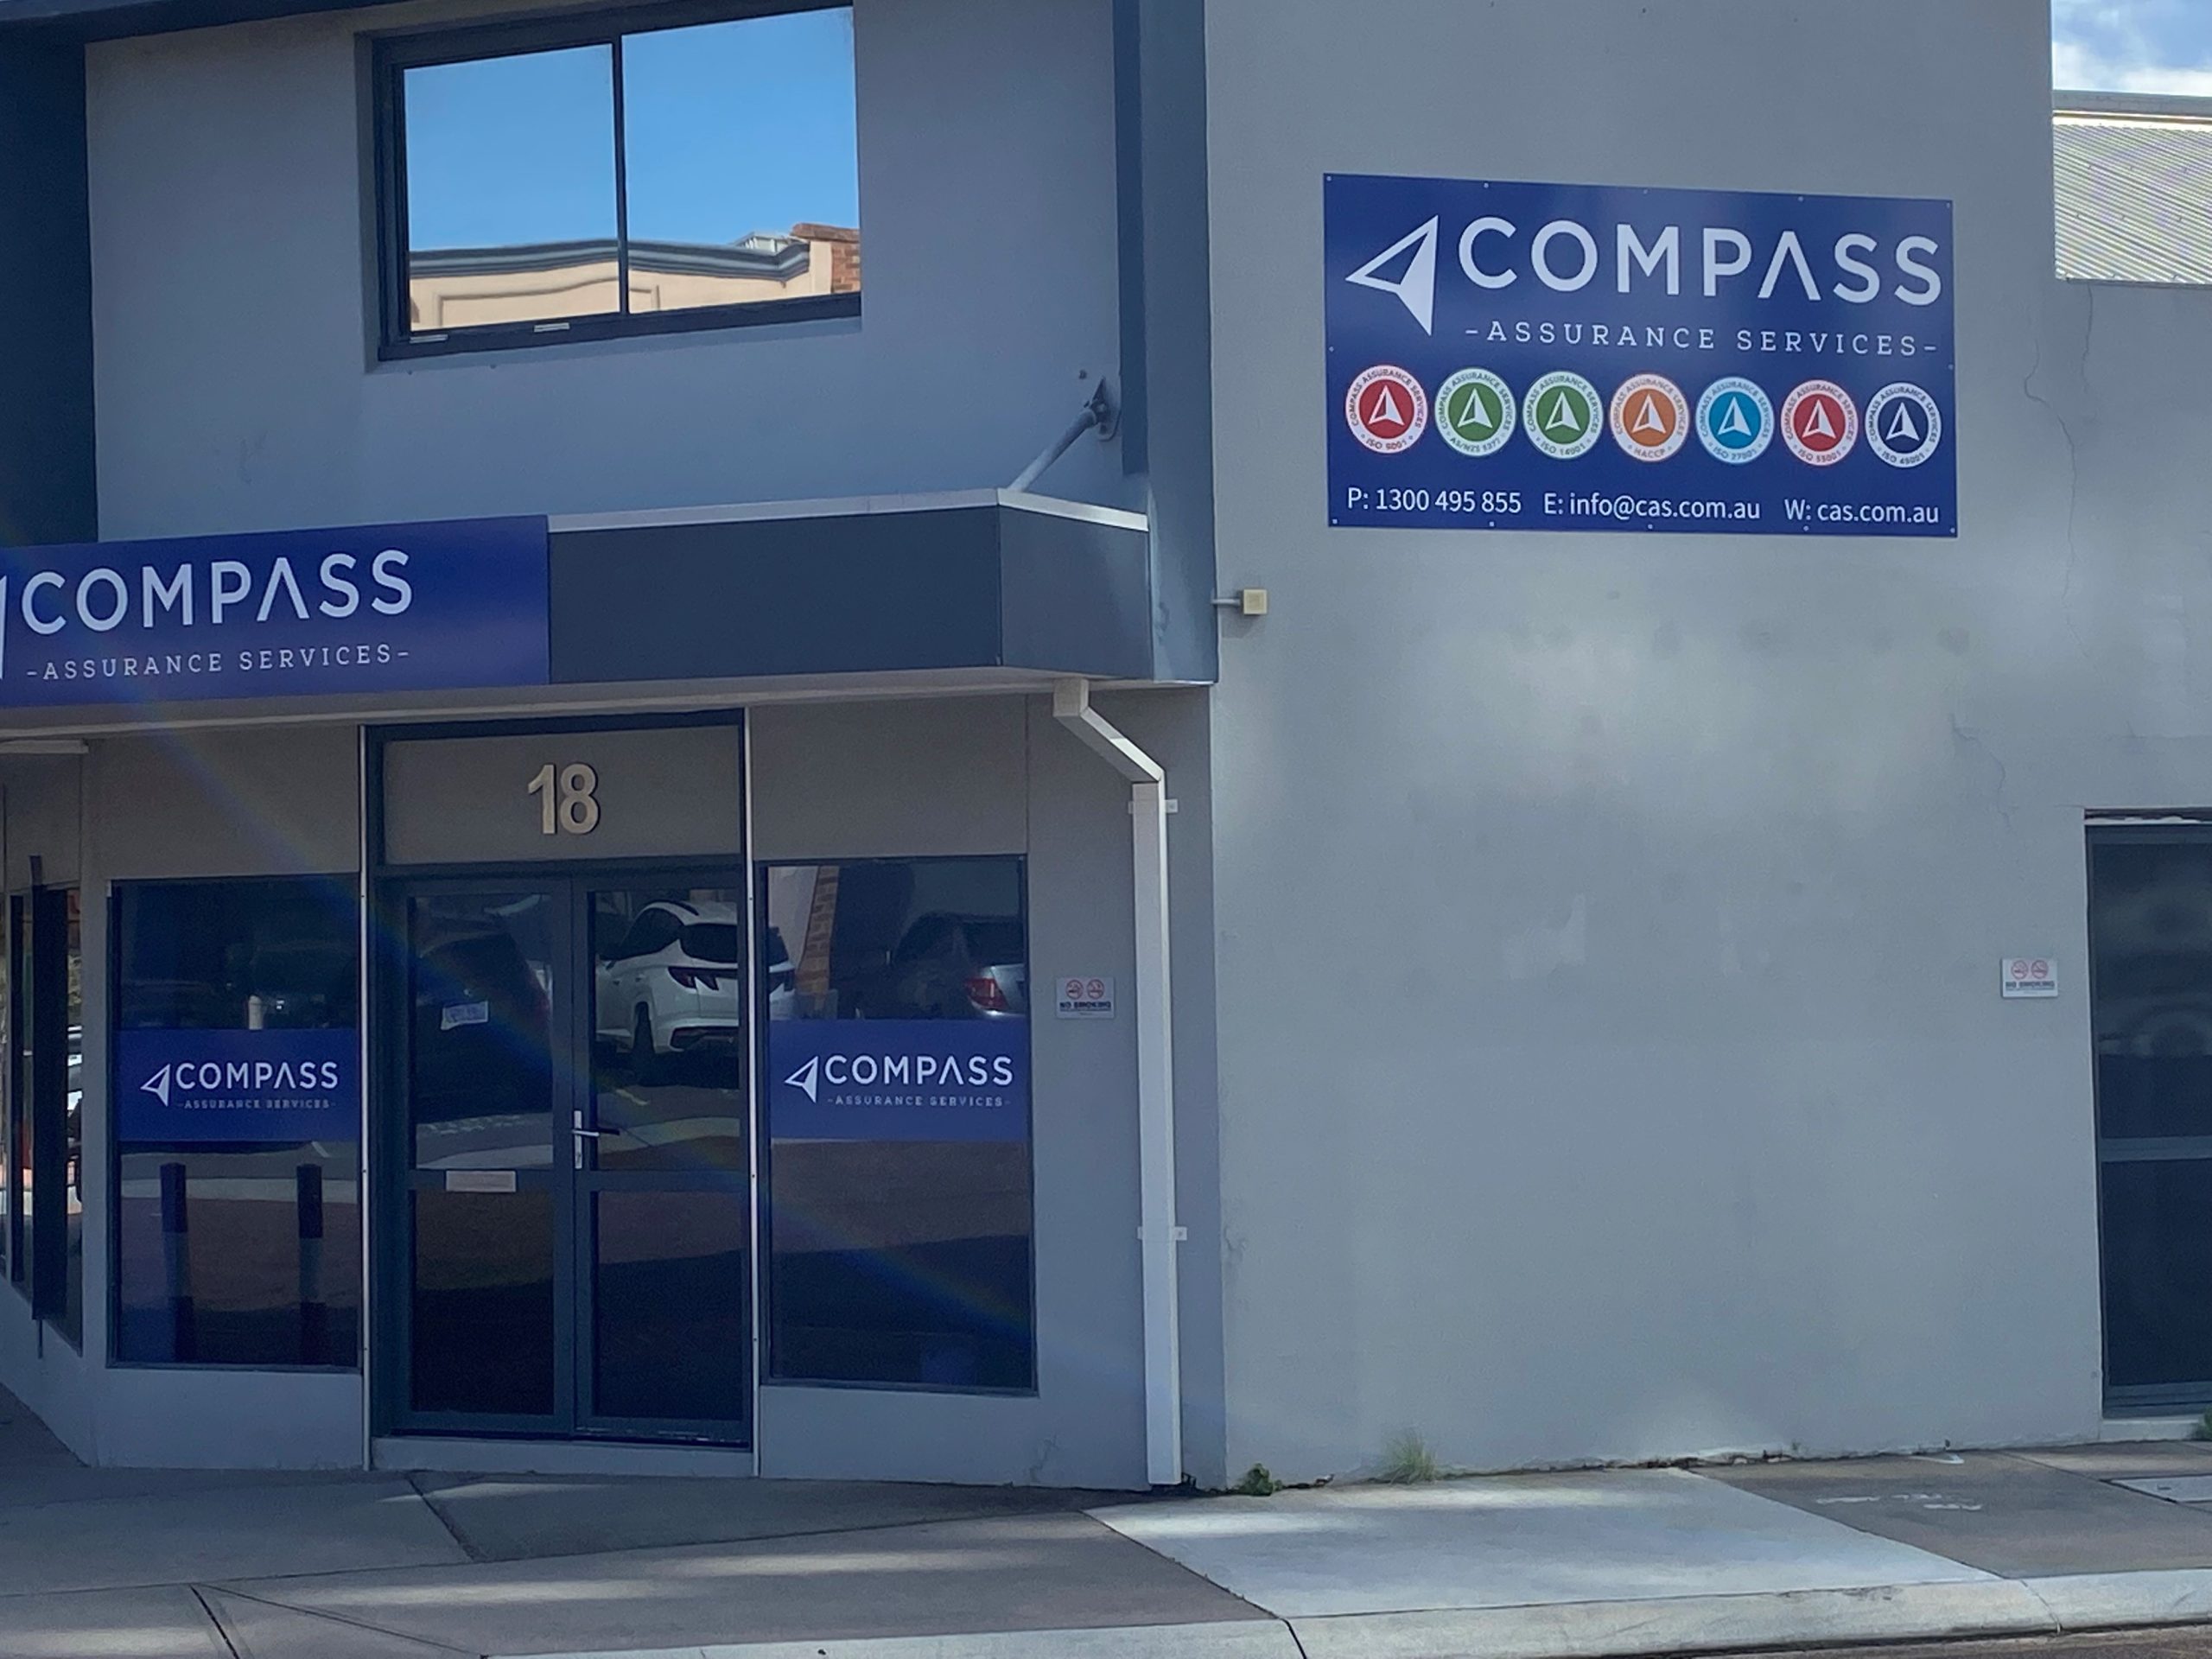 Compass Assurance Services office for 9001 certification in Perth